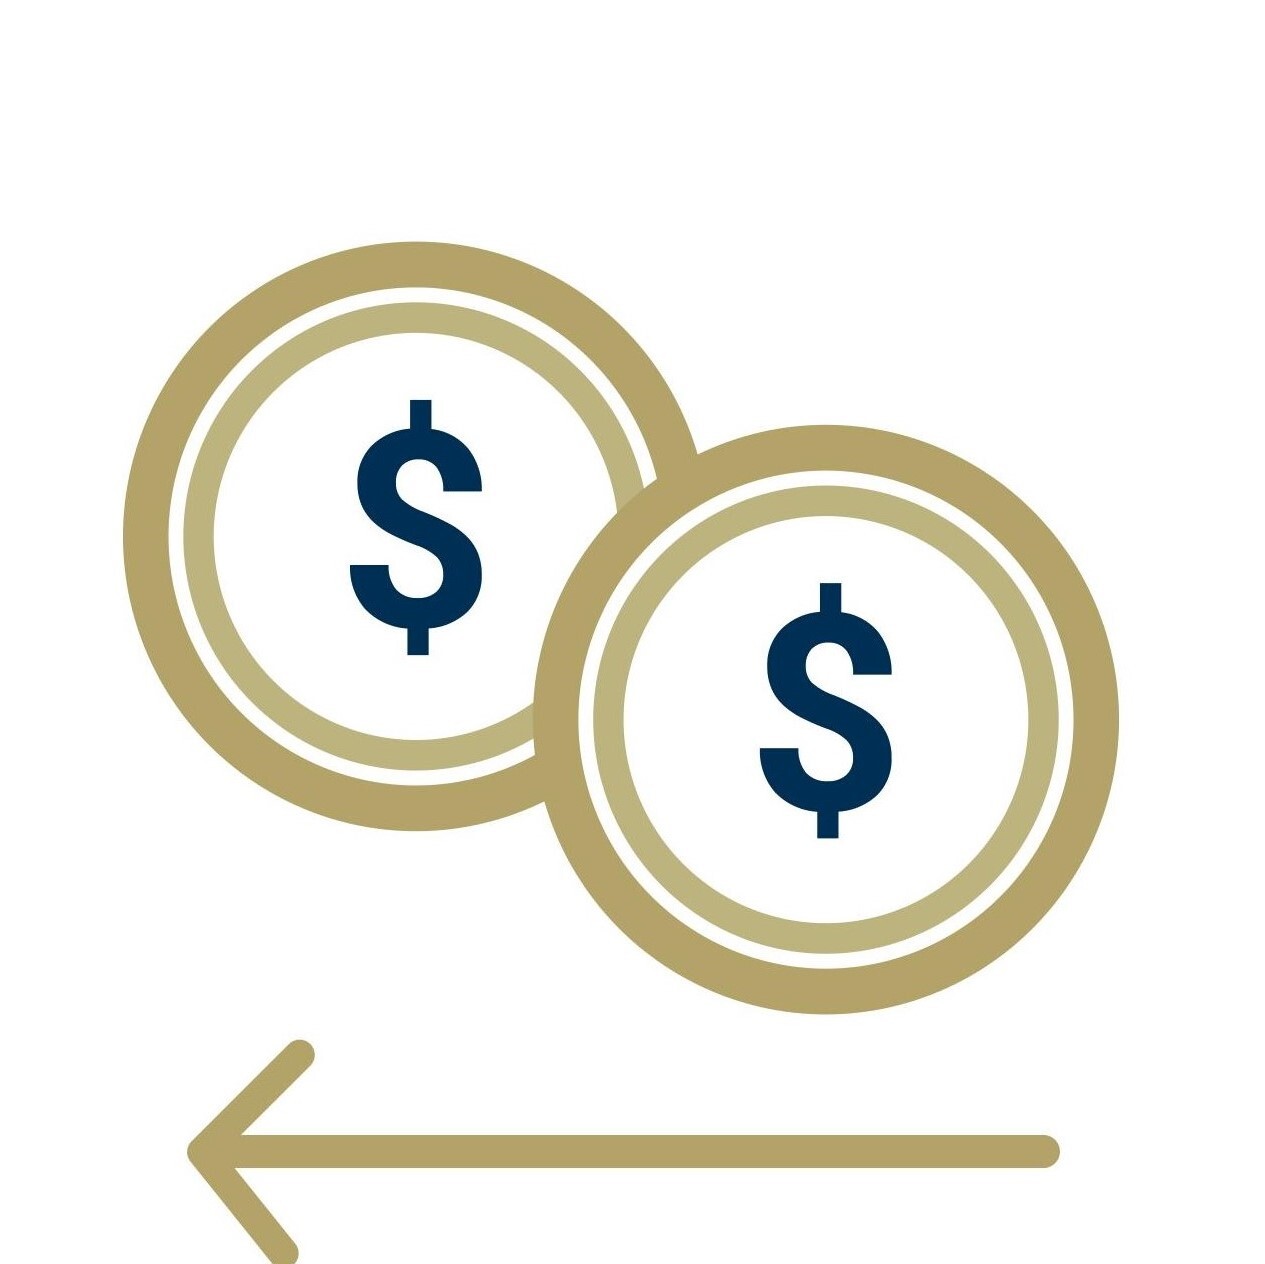 Illustration of coins with dollar signs and an arrow.